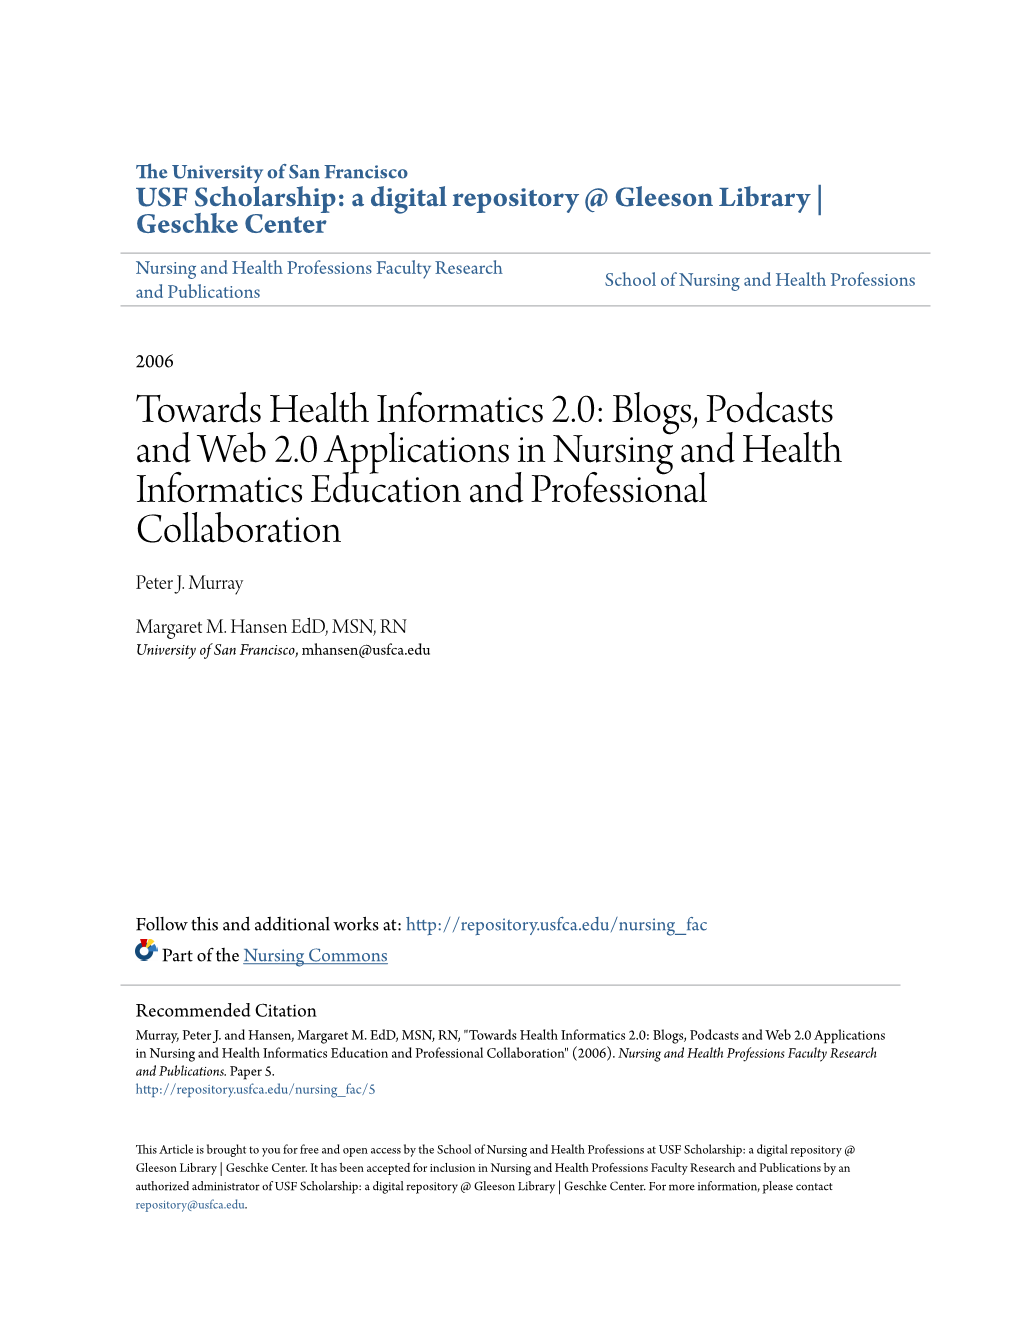 Blogs, Podcasts and Web 2.0 Applications in Nursing and Health Informatics Education and Professional Collaboration Peter J